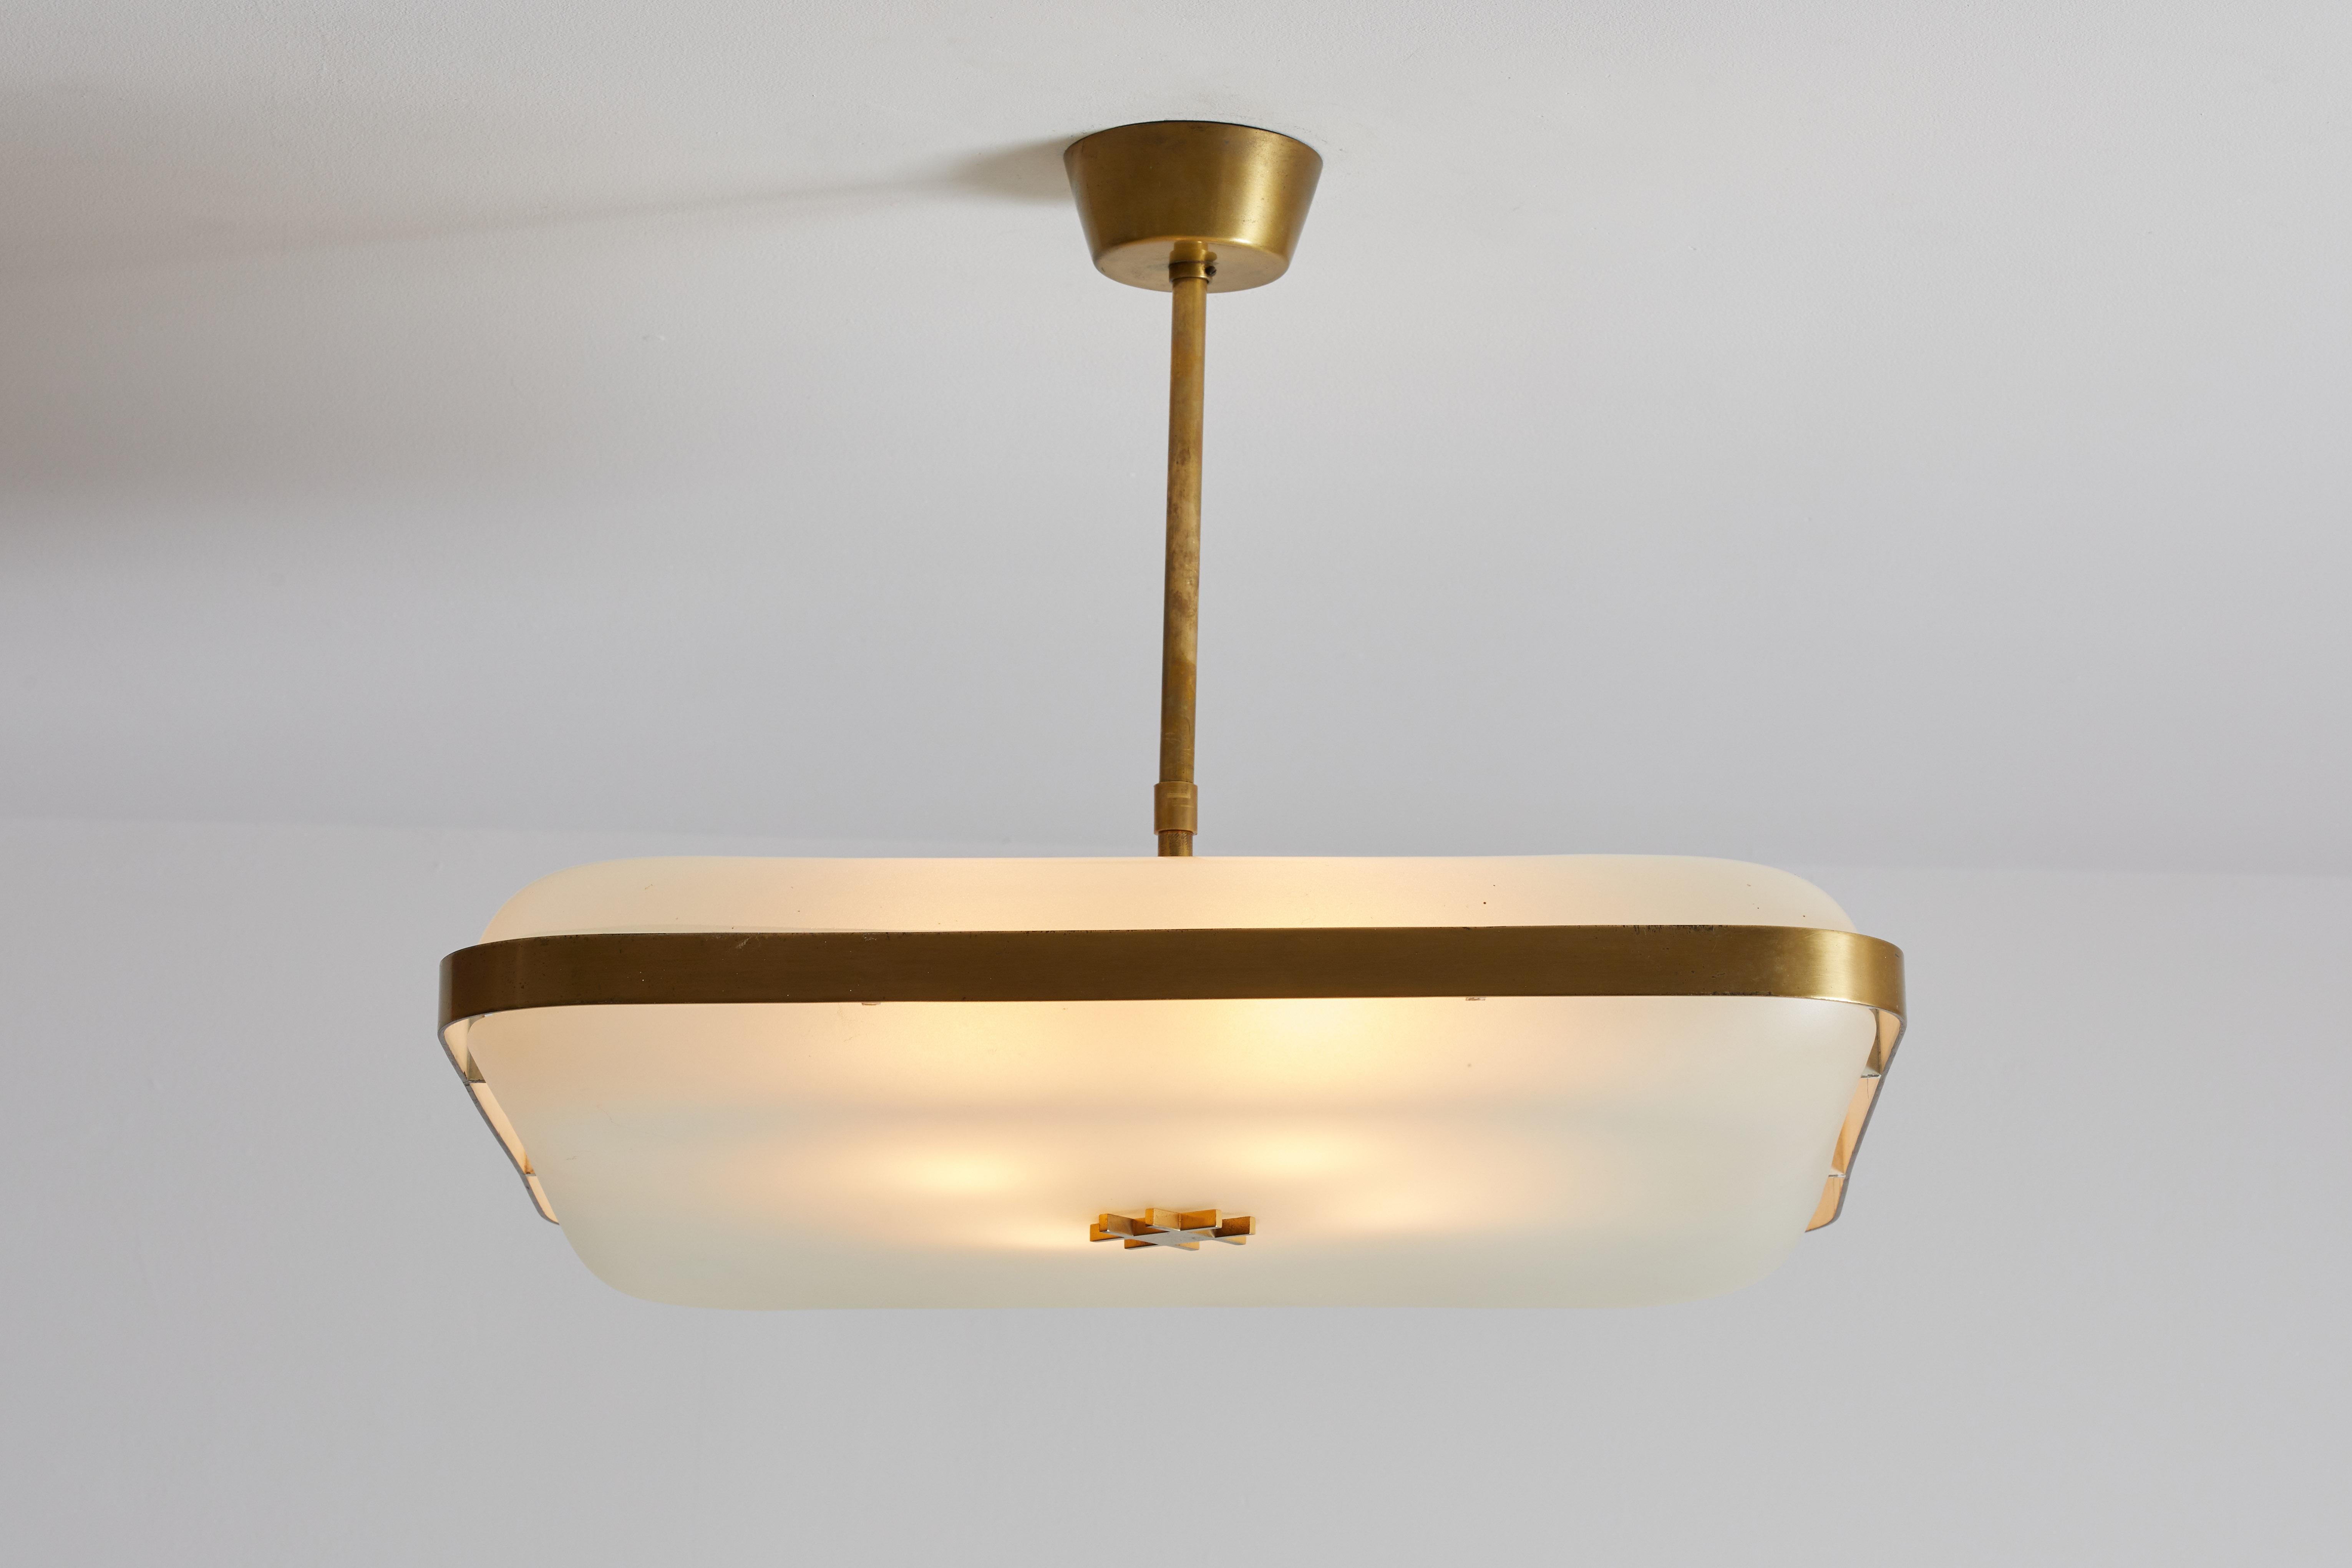 Model 2022 flush mount ceiling light by Max Ingrand for Fontana Arte. Designed and manufactured in Italy, circa 1960s. Satin glass with brushed brass hardware. Takes four E27 40w maximum bulbs. Literature: Quaderno Fontana Arte n. 1, p. 12.